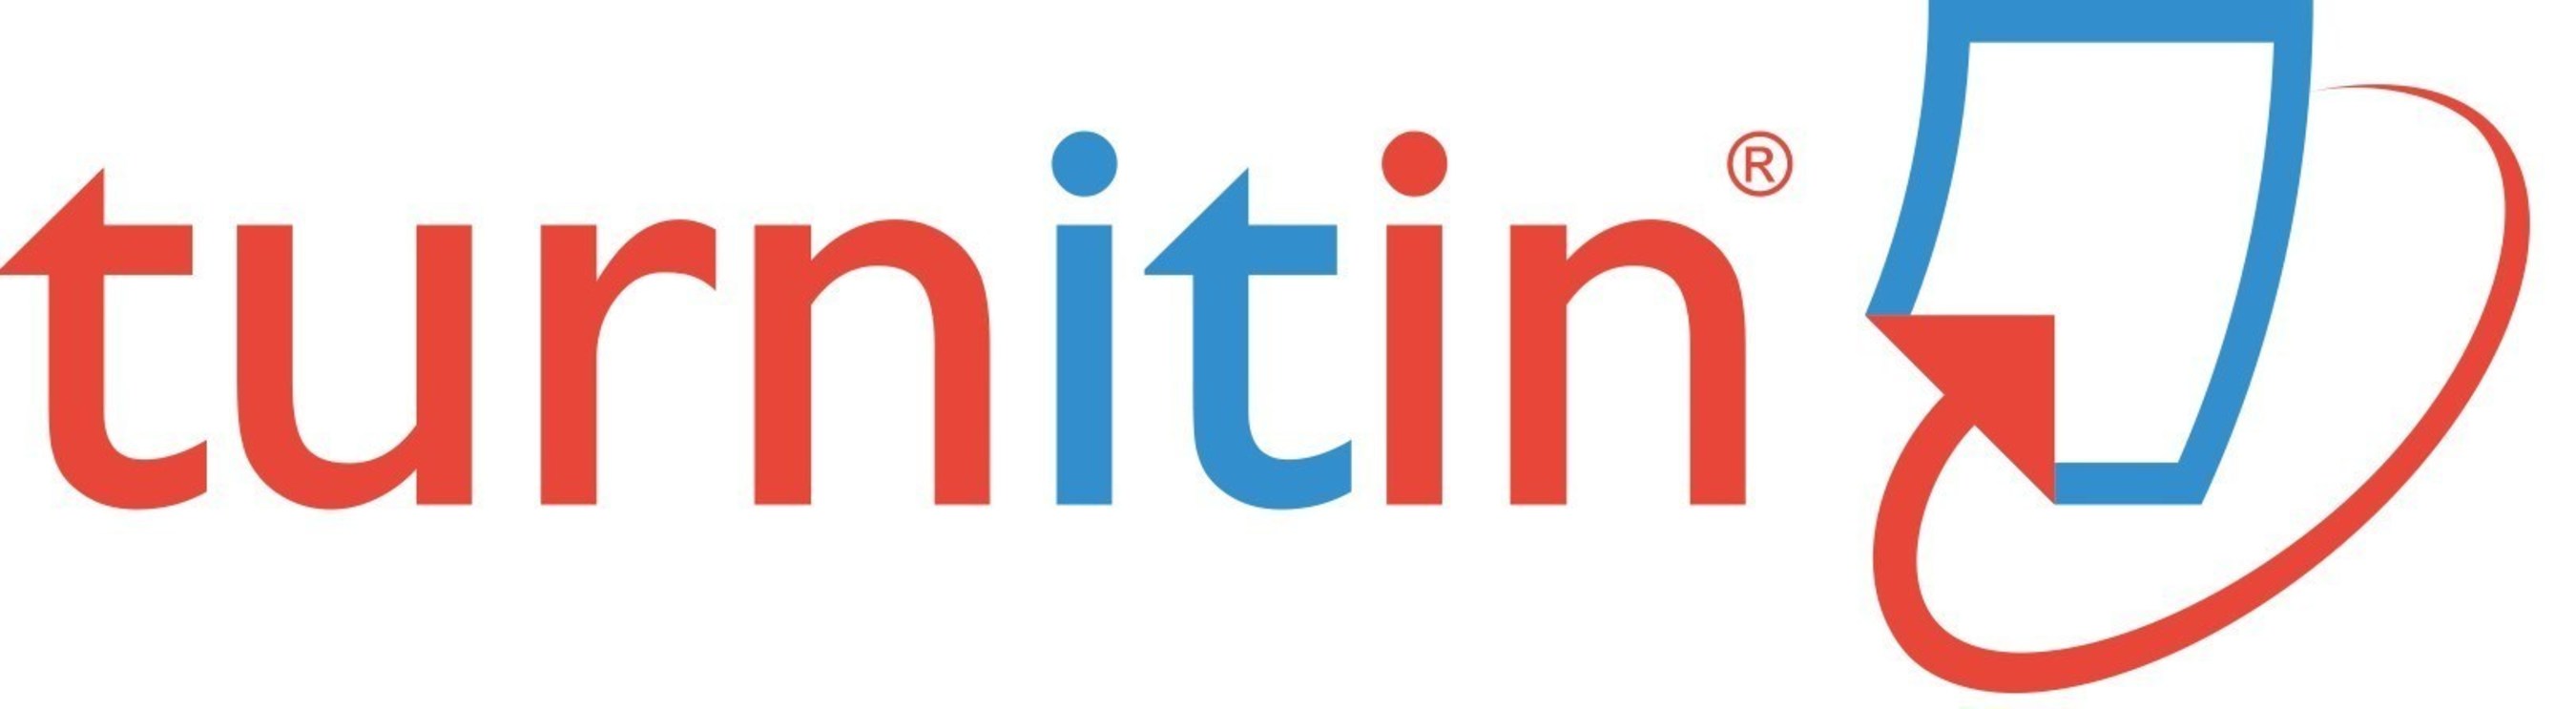 Turnitin: Revolutionizing the experience of writing to learn.